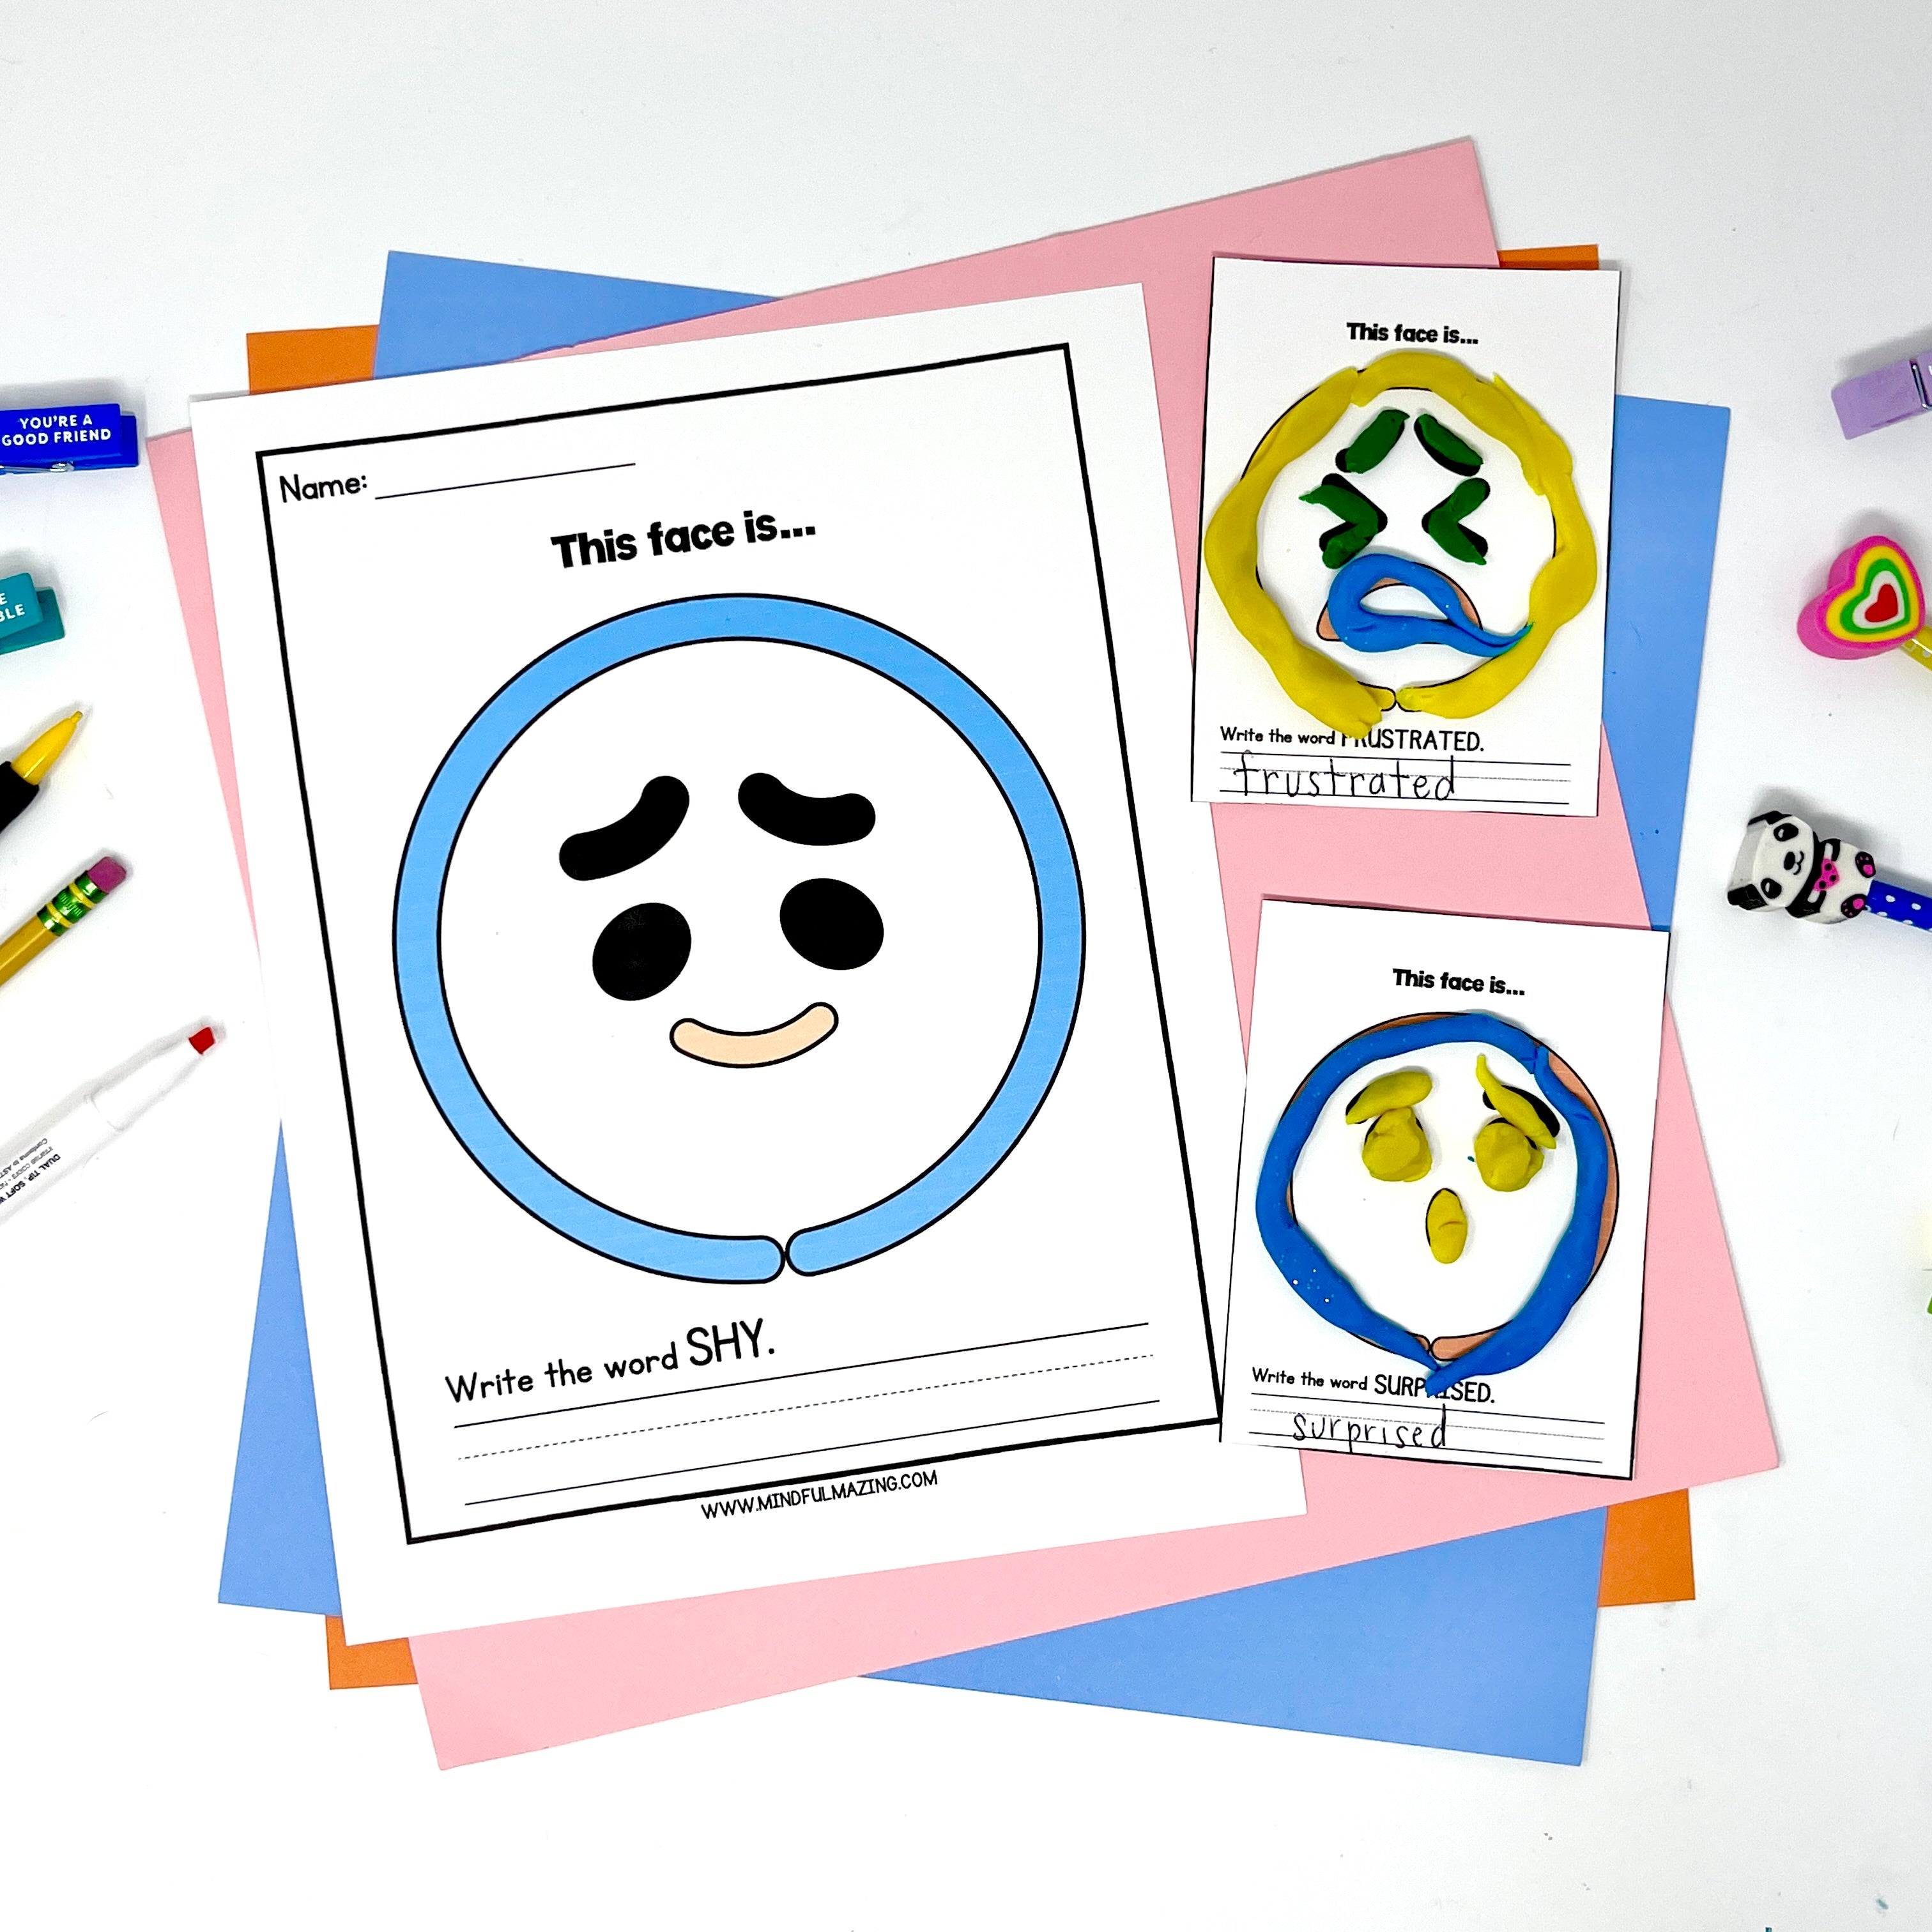 Emotions and Feelings Social Emotional Learning Unit (ages 3 - 8)